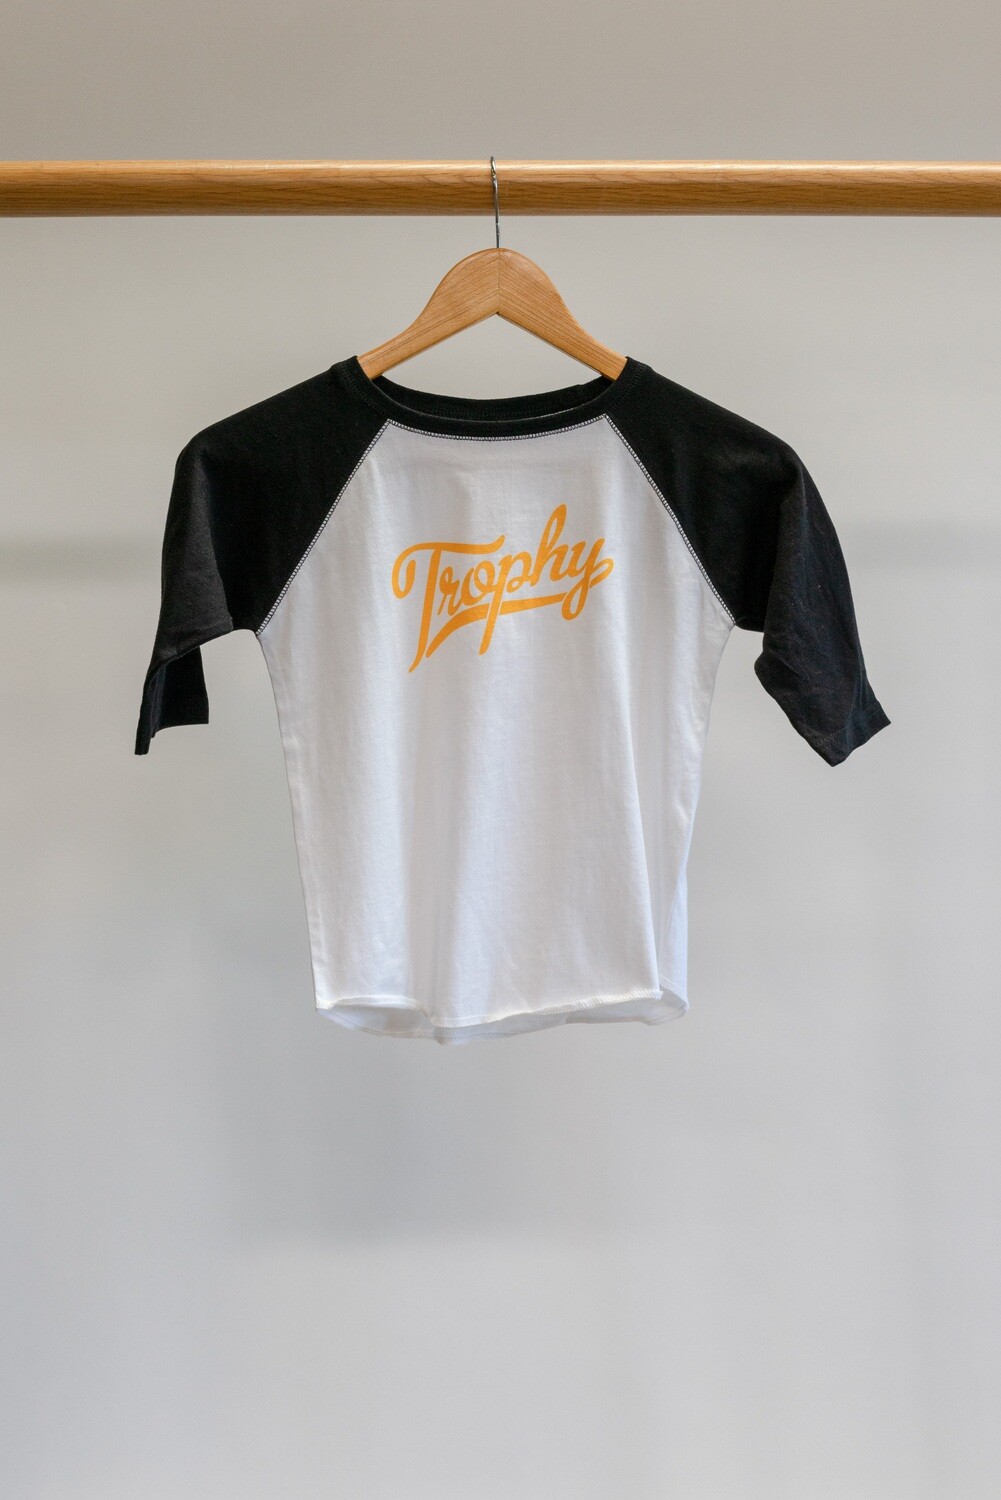 Trophy Toddler Baseball Tee - Gold and Black